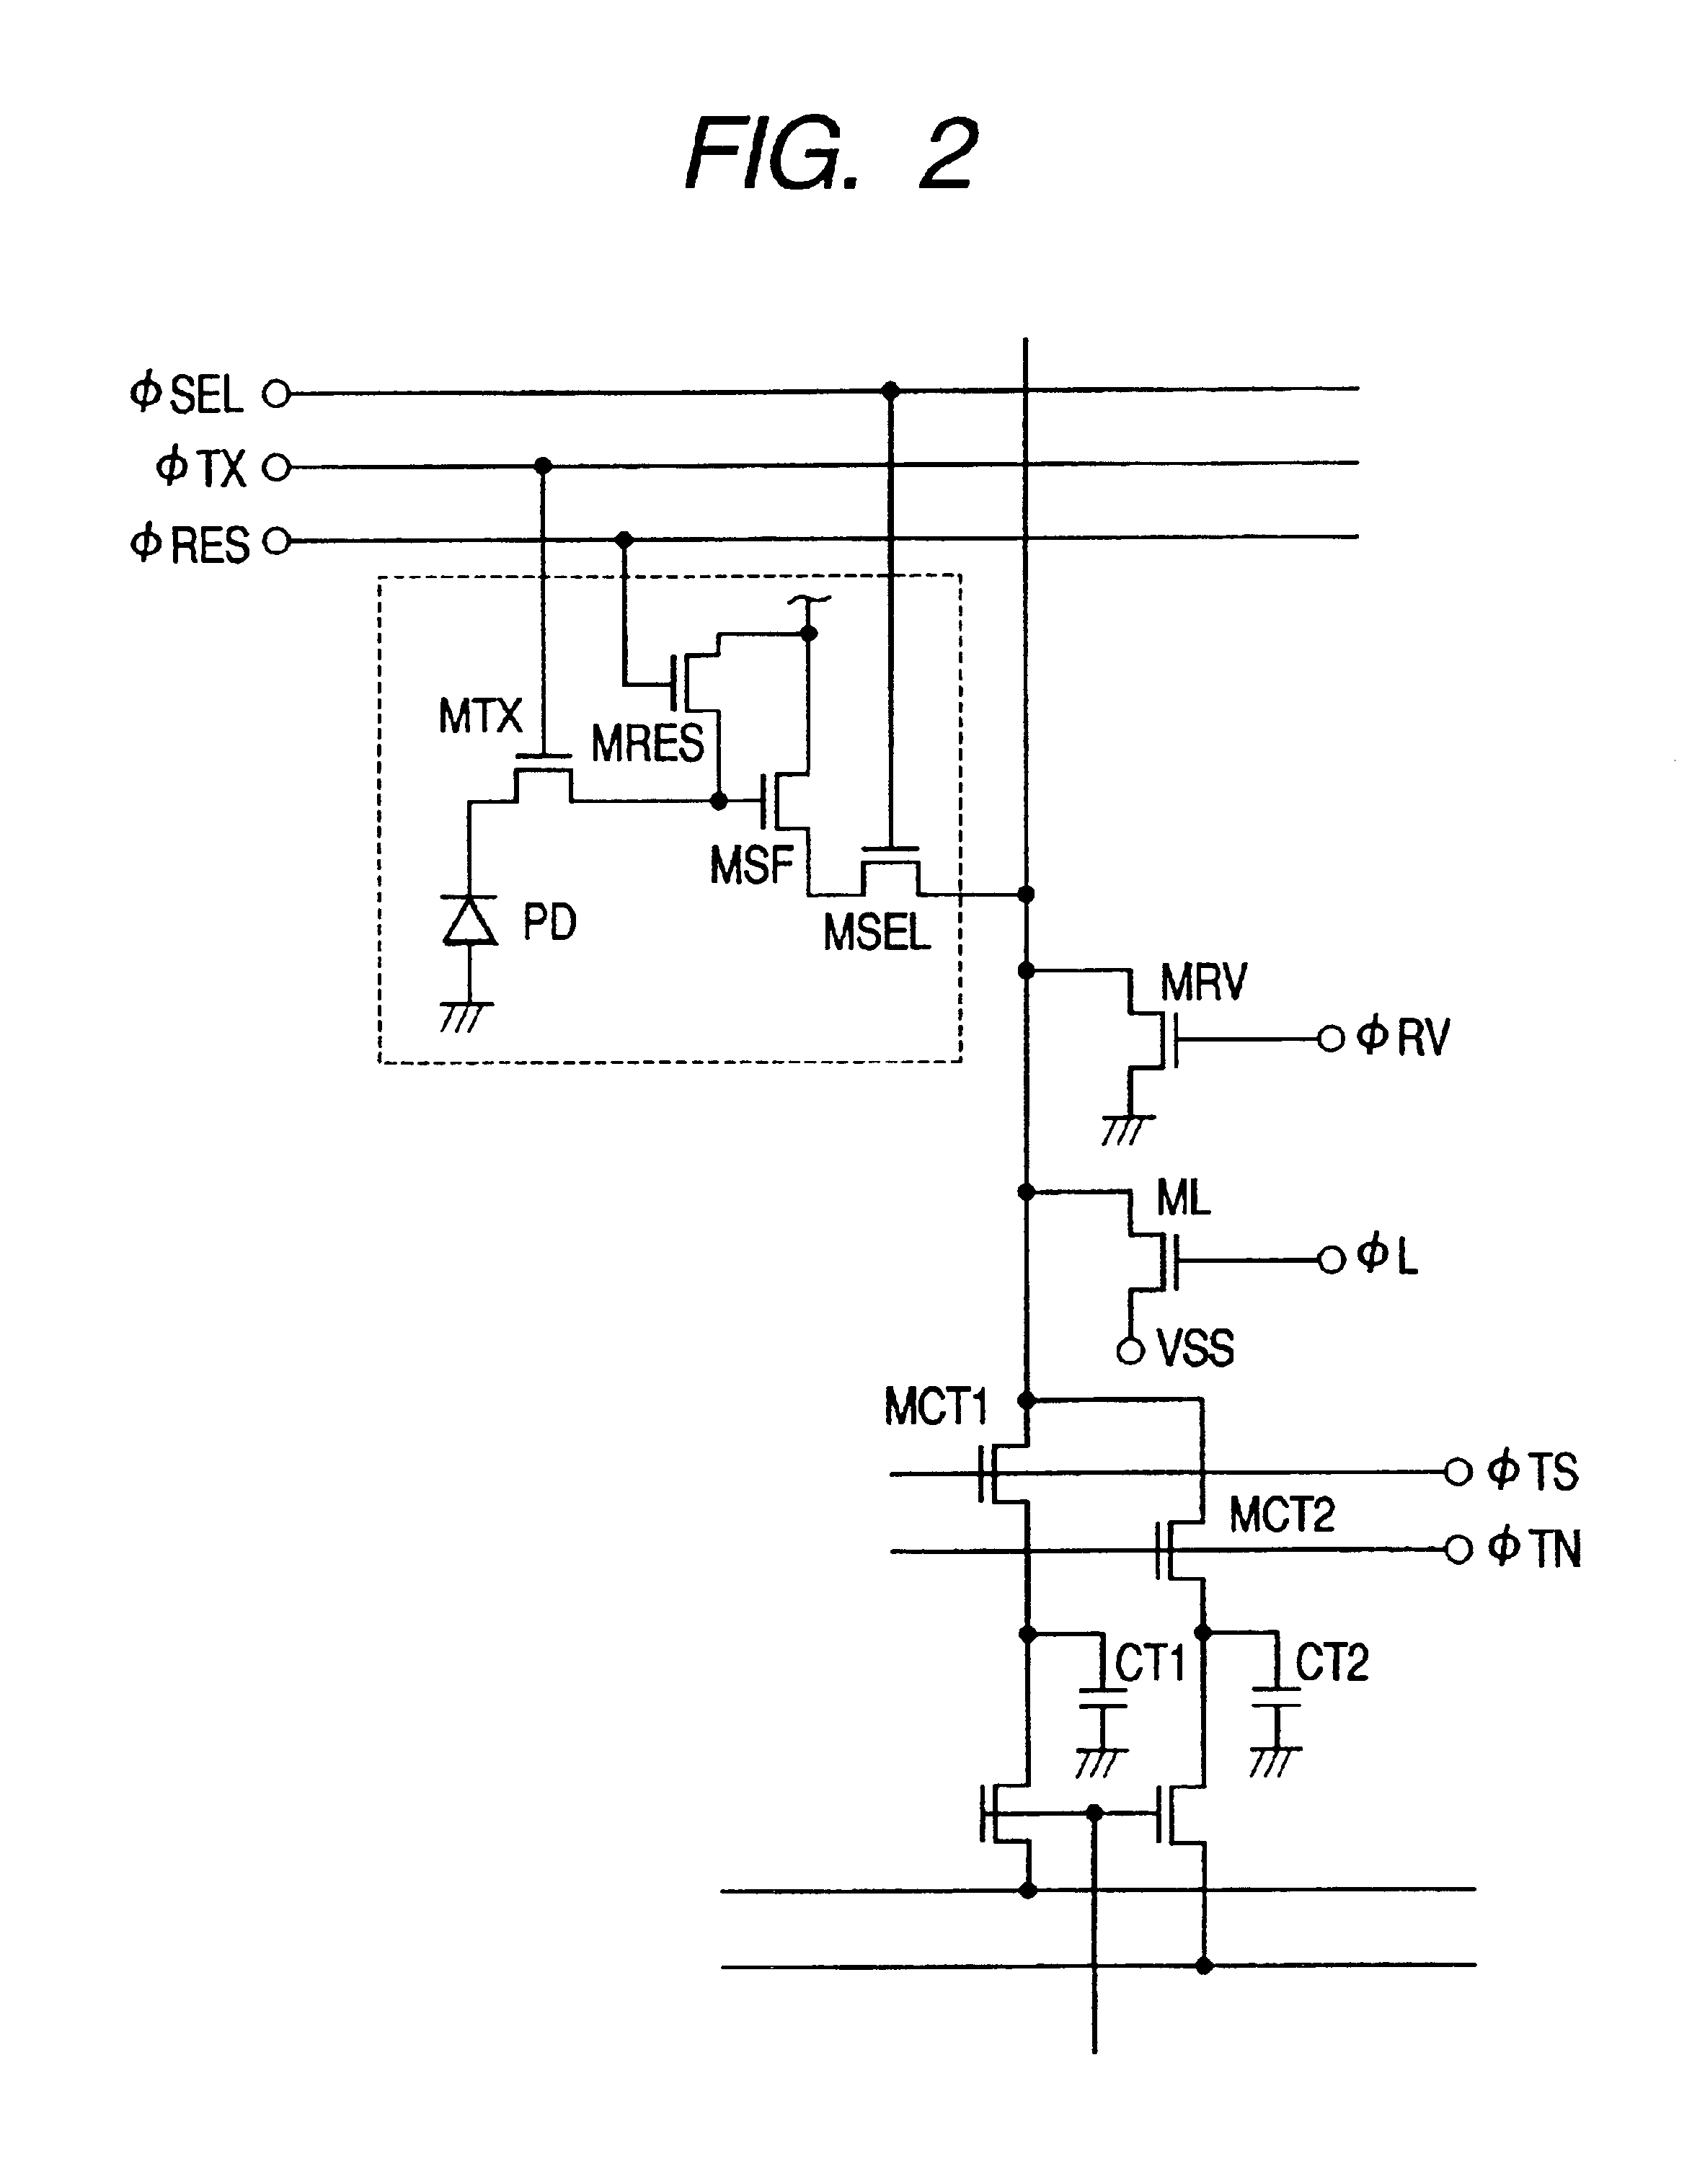 Image pickup apparatus having plural pixels arranged two-dimensionally, and selective addition of different pixel color signals to control spatial color arrangement